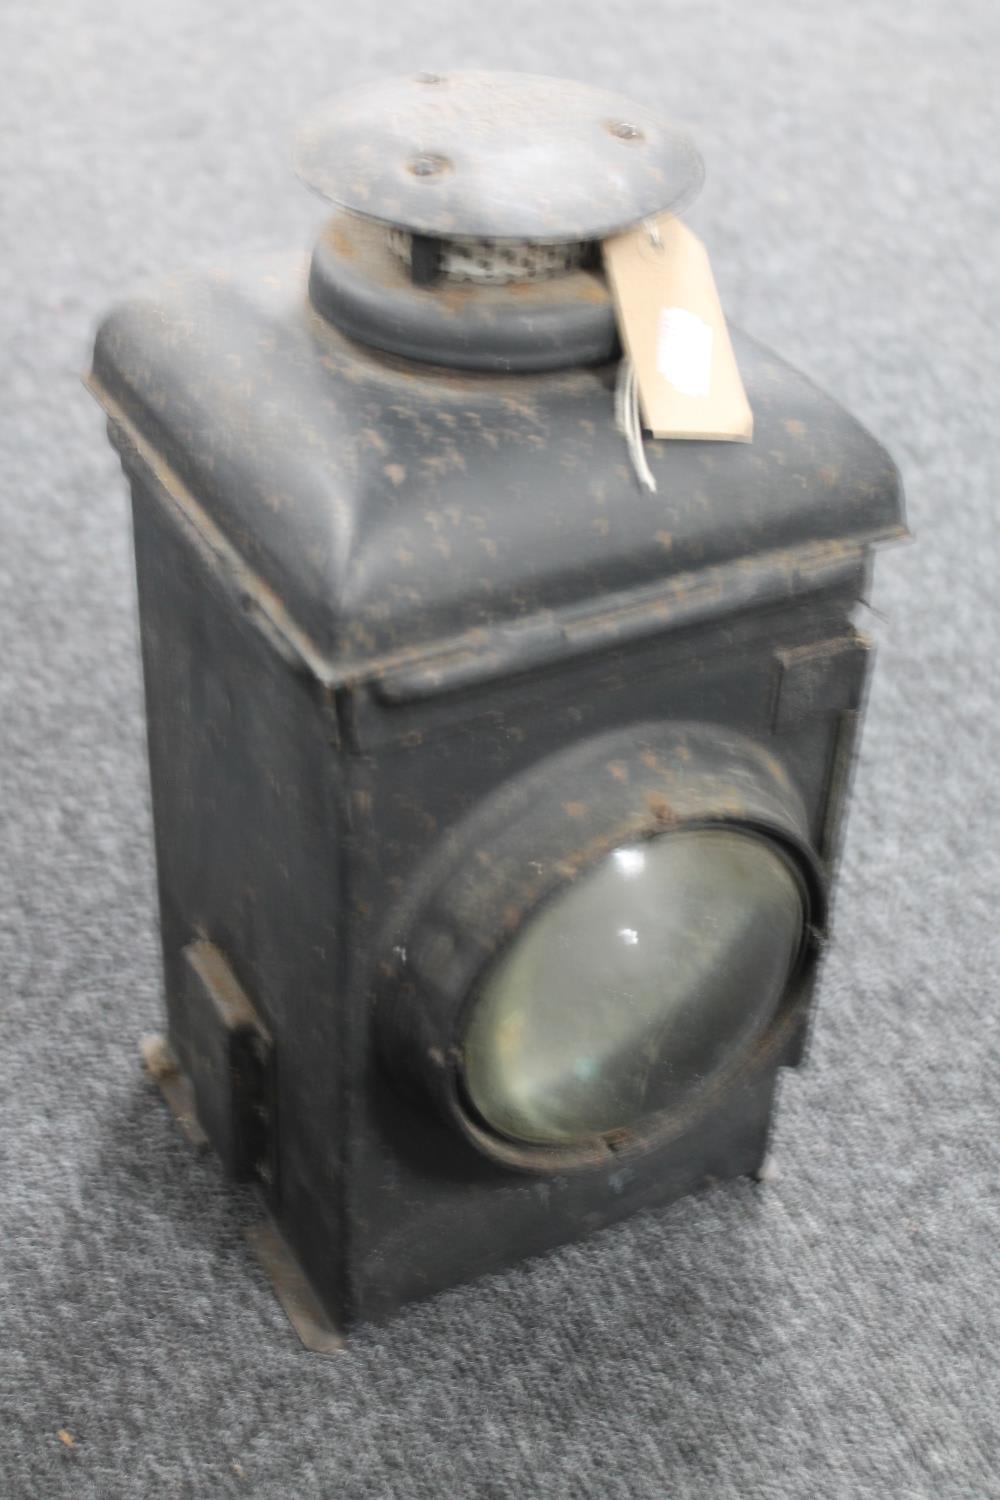 A vintage The Adlake railway lamp with clear glass lens